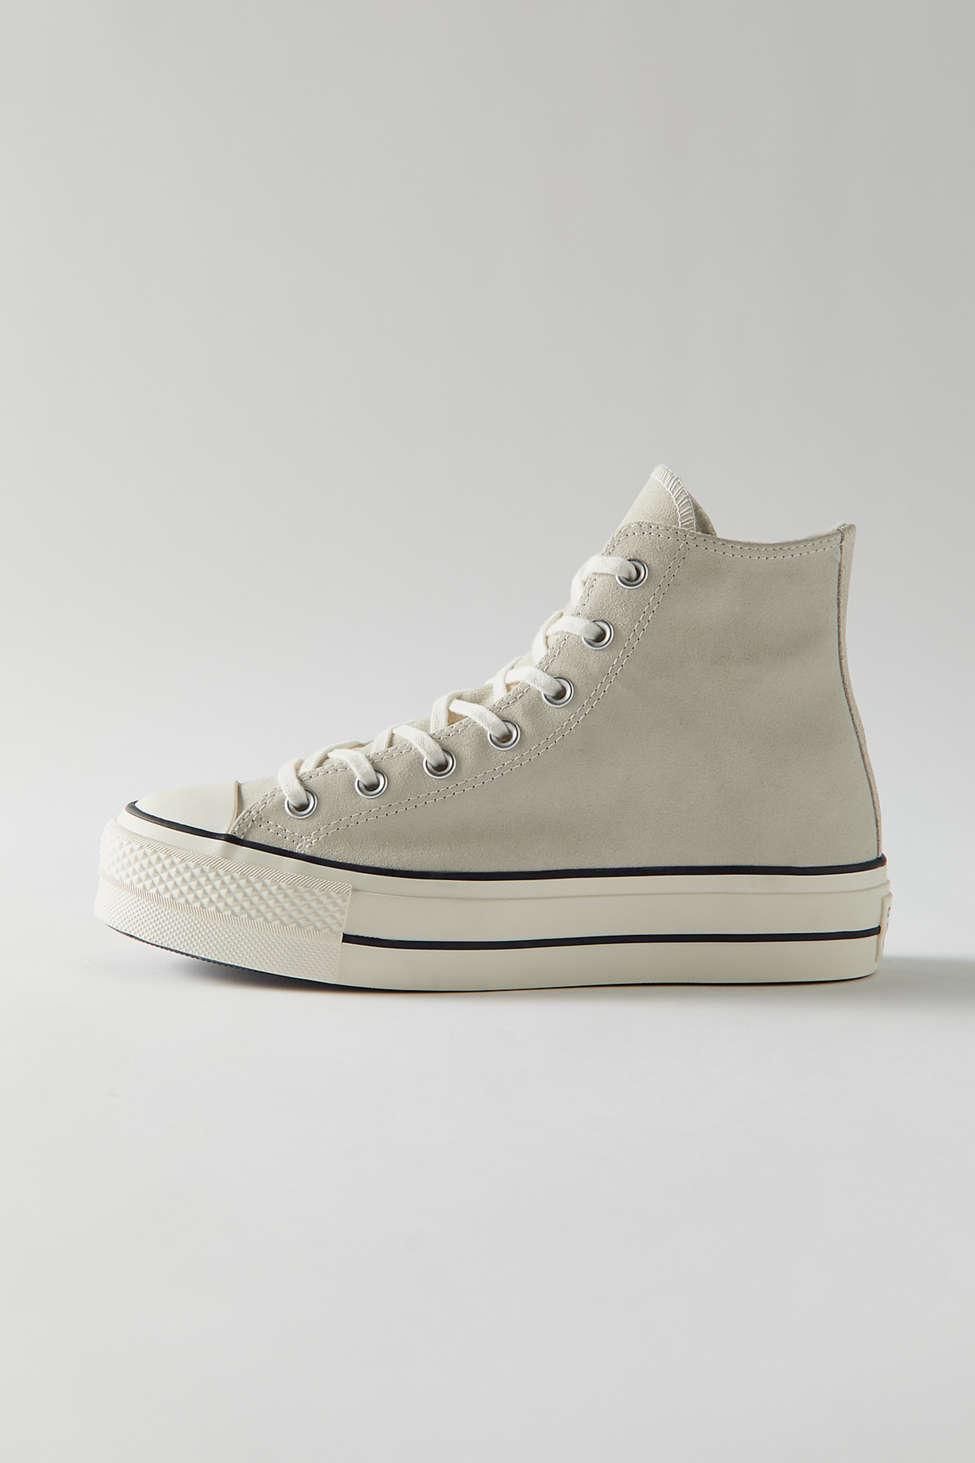 Converse Chuck Taylor All Star Suede Platform High Top Sneaker in White |  Lyst